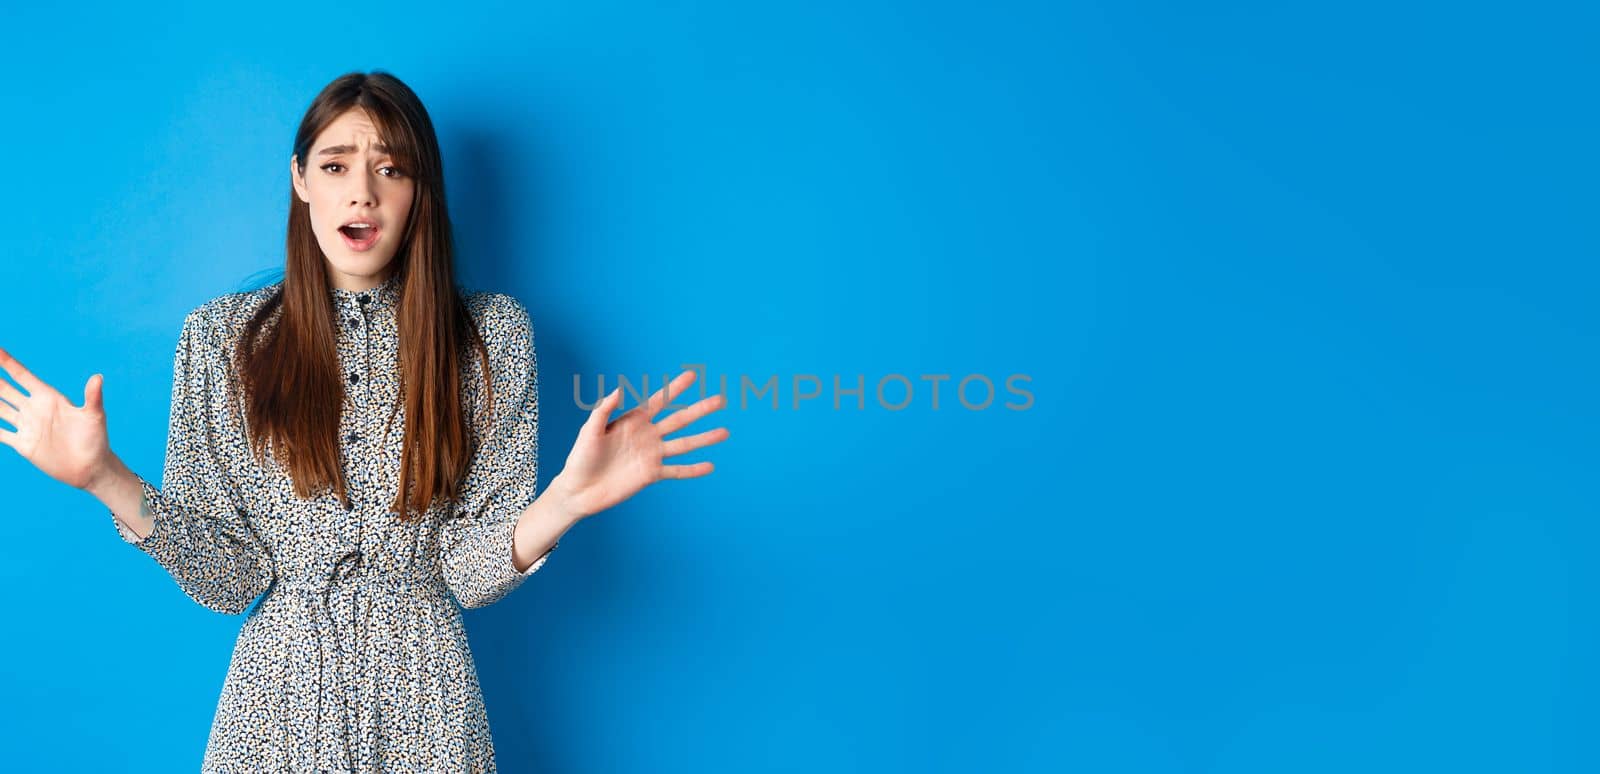 Sad and gloomy woman in dress facing failure, looking distressed and sighing upset, losing and standing on blue background.